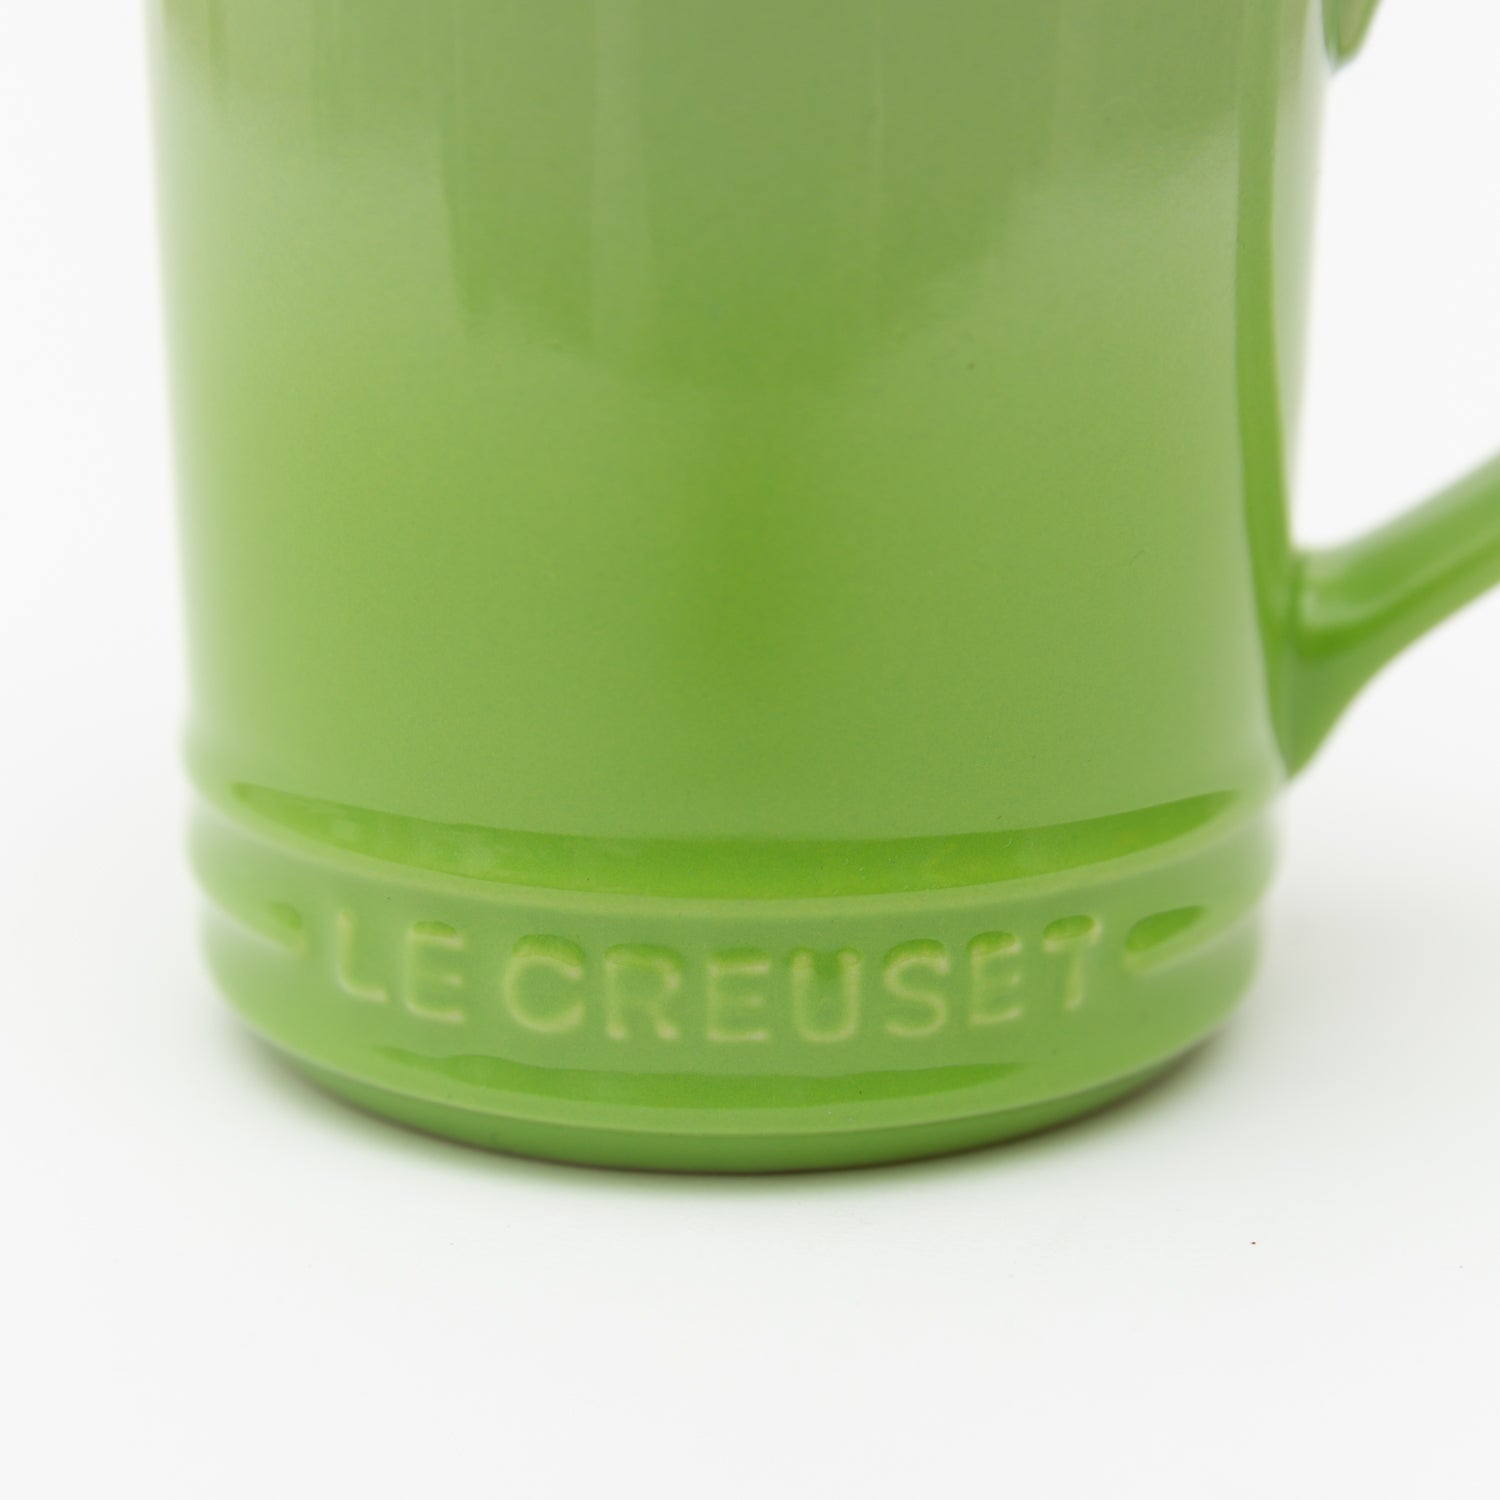 Load image into Gallery viewer, Le Creuset Coffee mug_Green